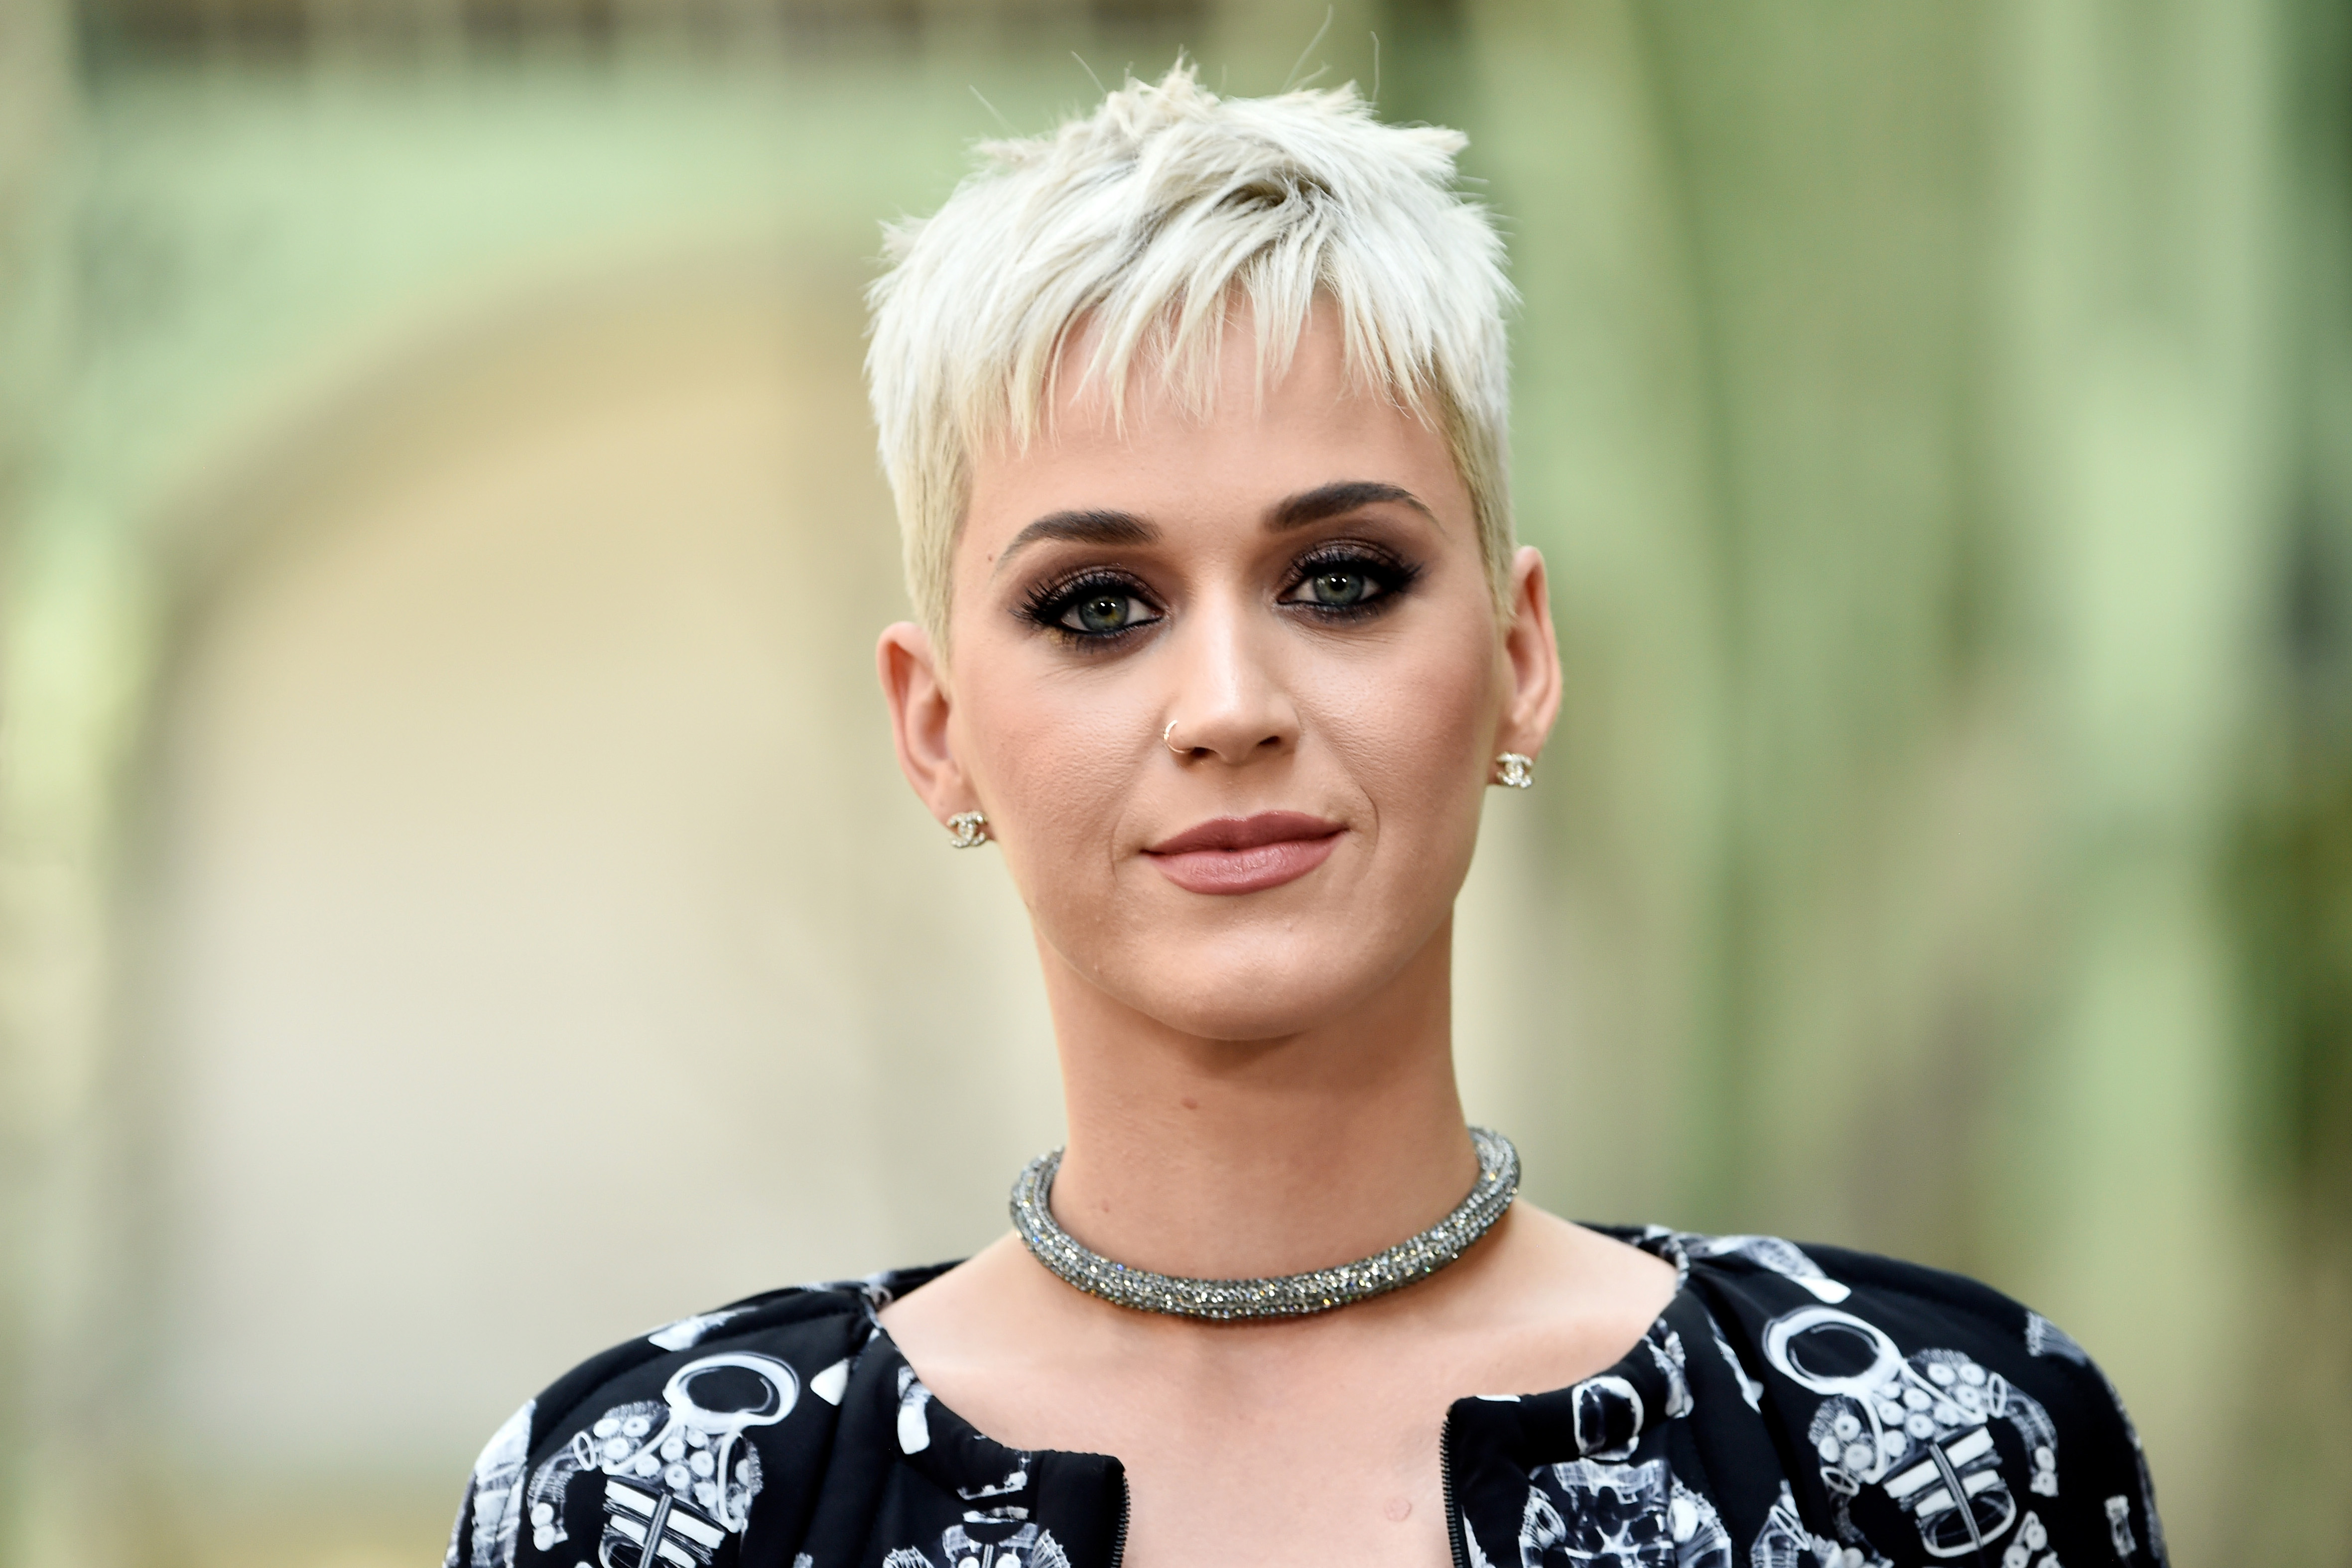 abigail schuman share katy perry sex pictures photos